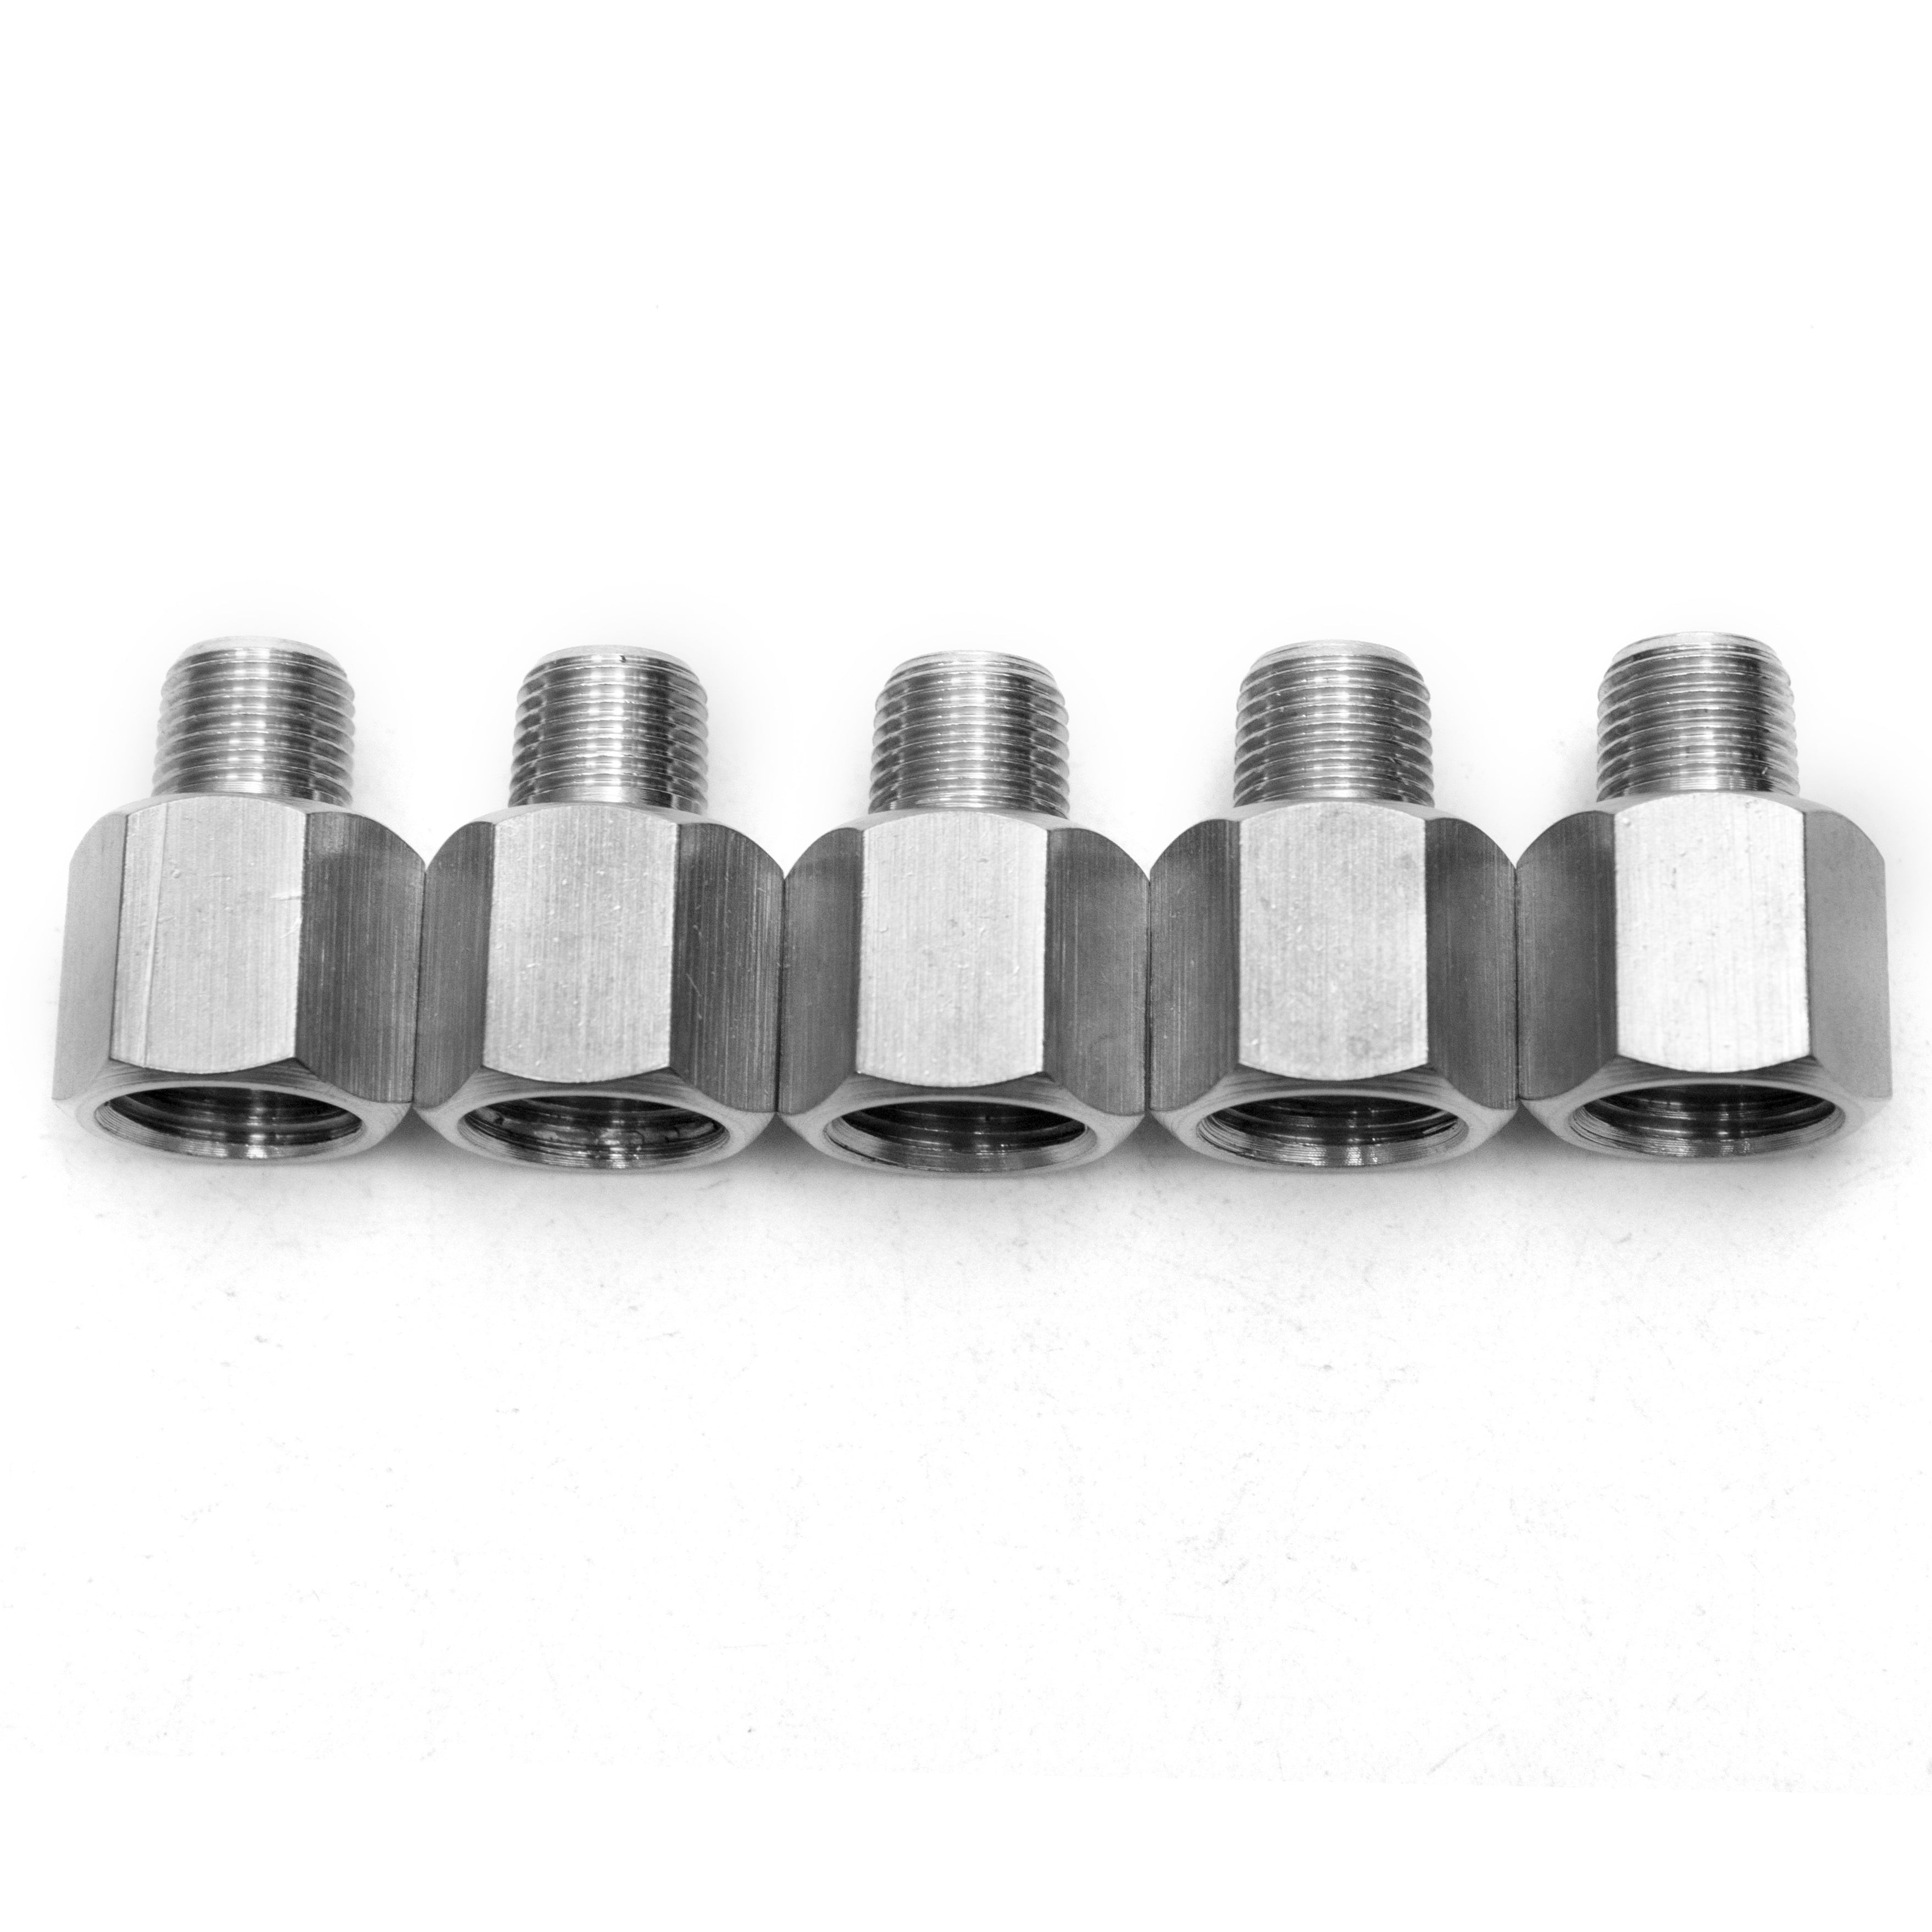 LTWFITTING Bar Production Stainless Steel 316 Pipe Fitting 1/4 Inch Female x 1/8 Inch Male NPT Adapter Air Fuel Water (Pack of 5)